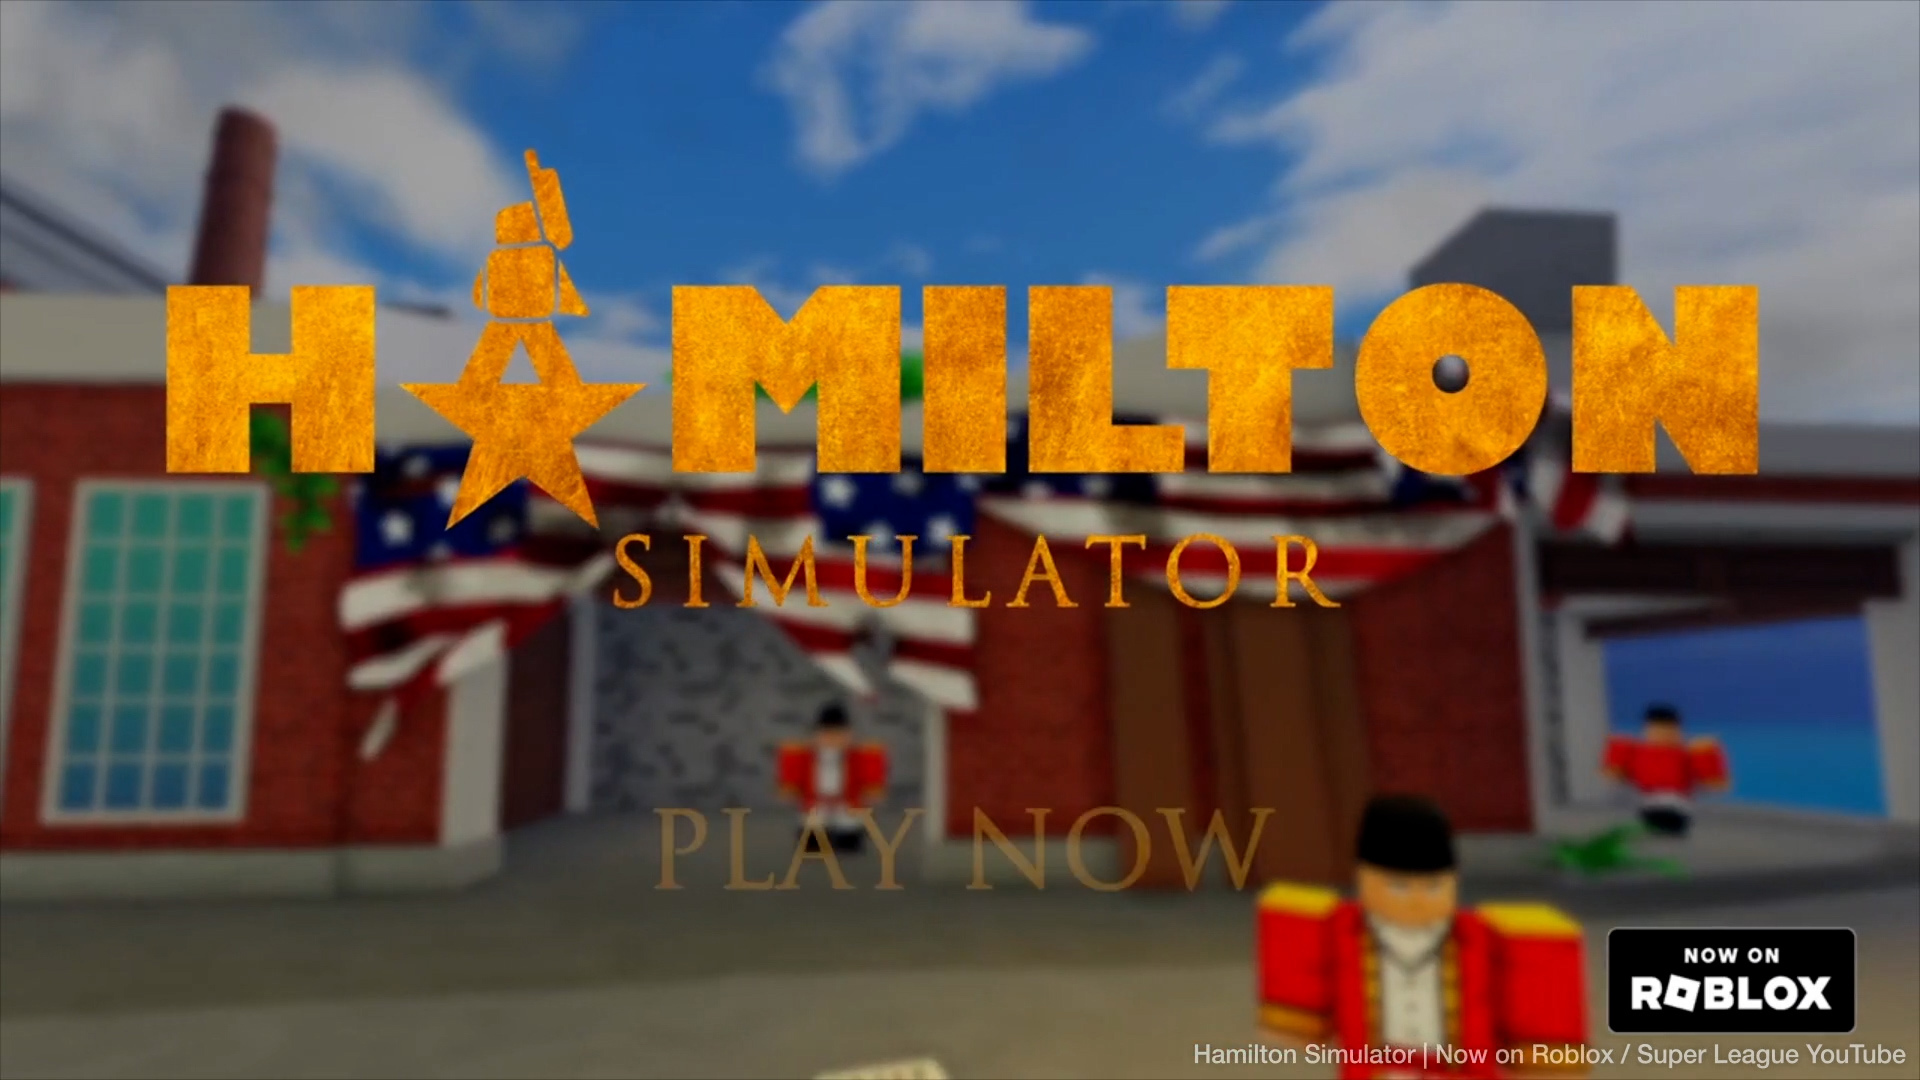 Hamilton Simulator is real, and it's available to play right now